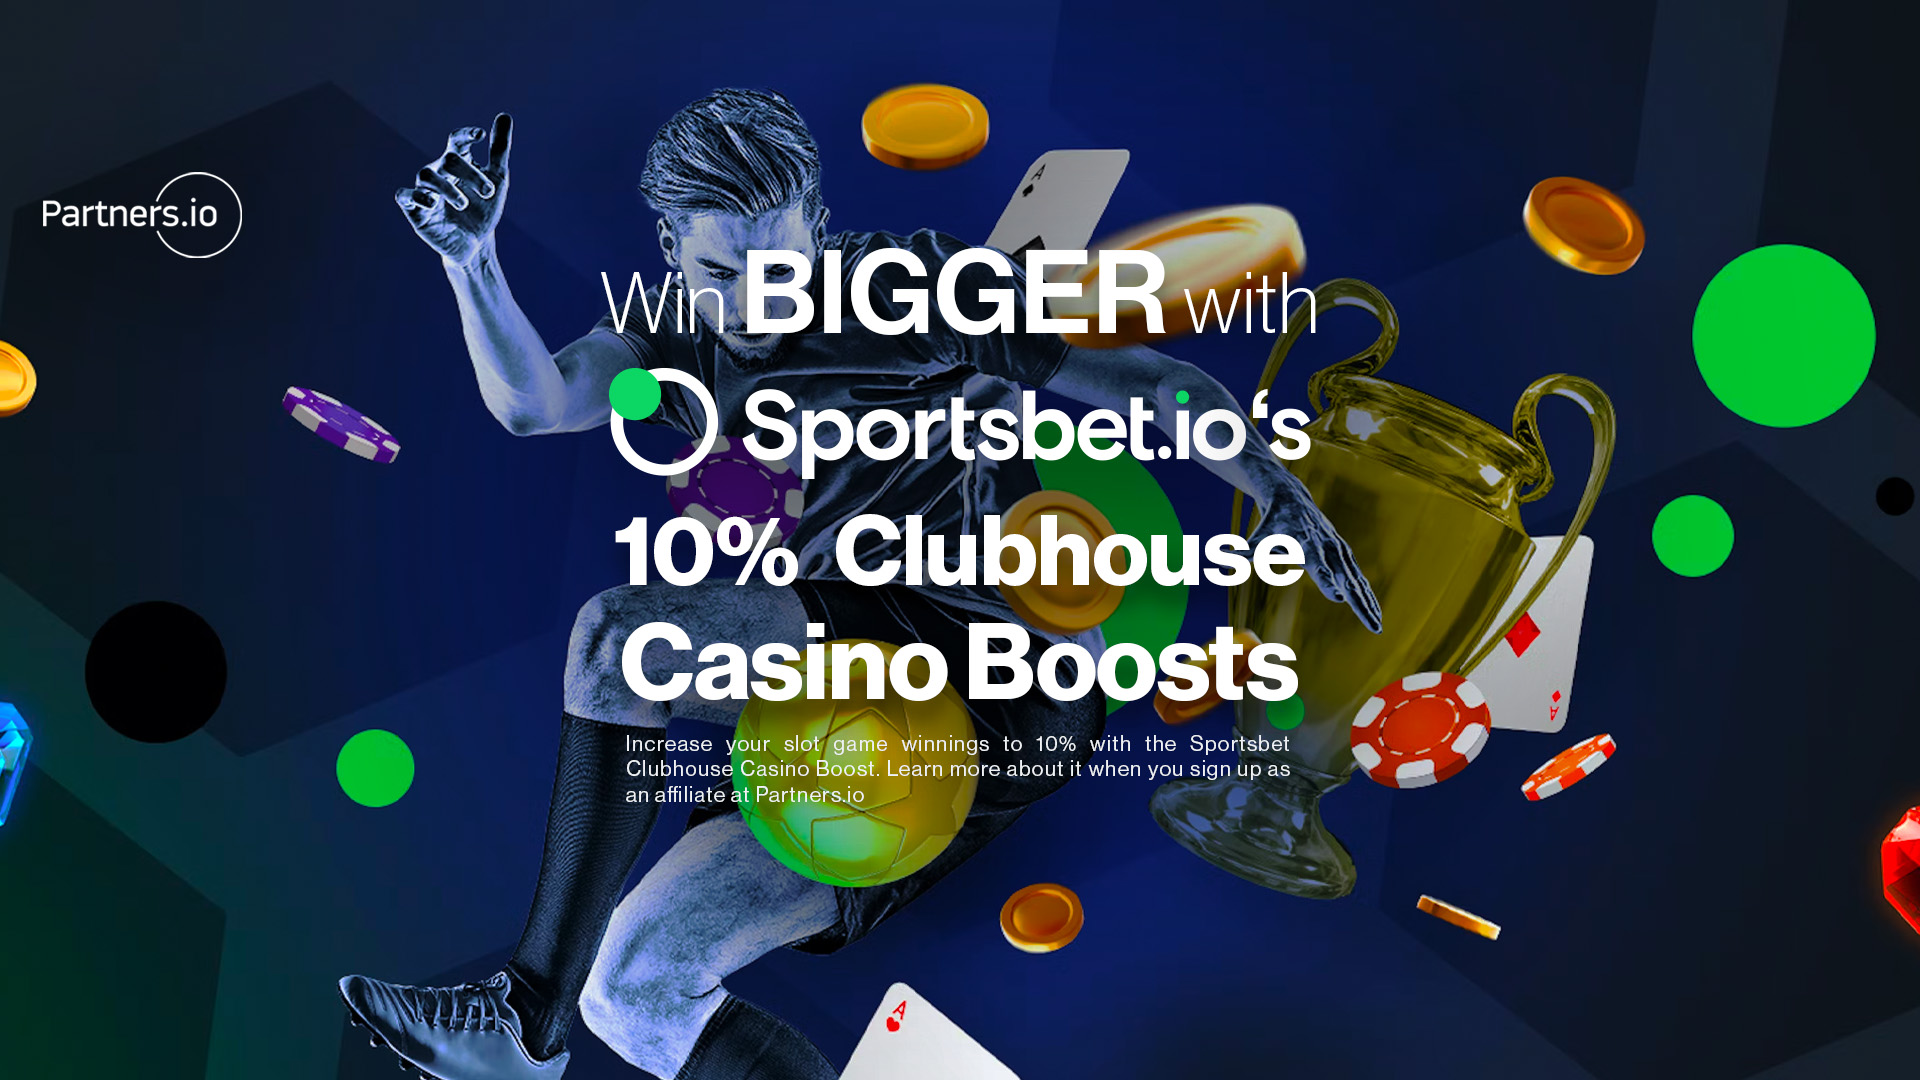 Win bigger with Sportsbet.io’s 10% Clubhouse Casino Boost